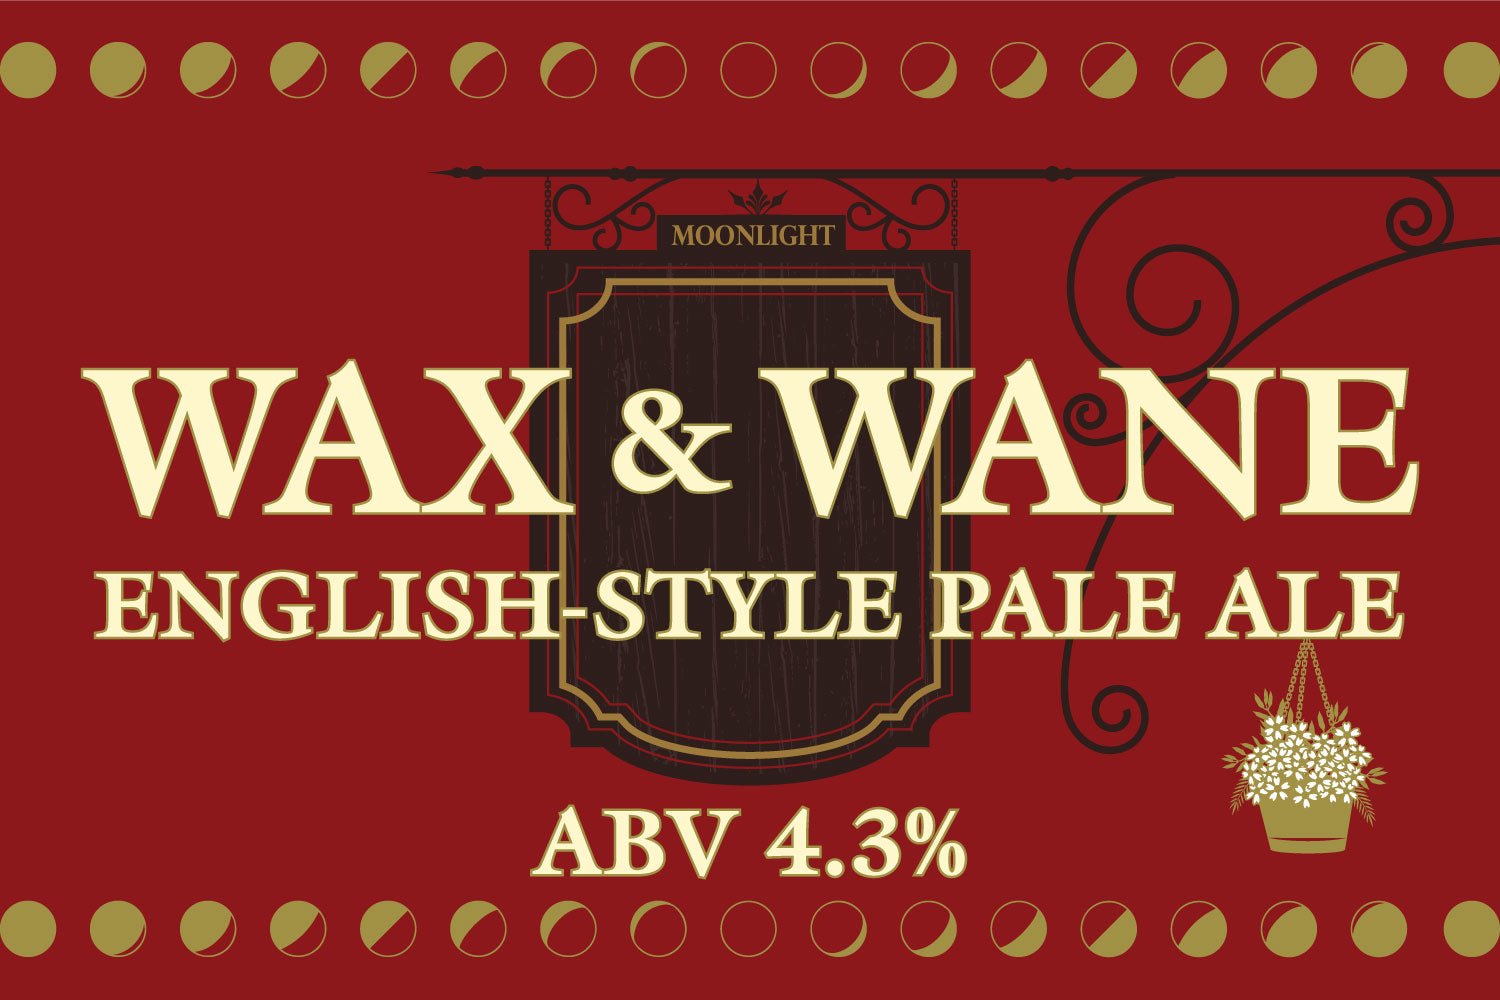 Wax and Wane English-Style Pale Ale beer sign